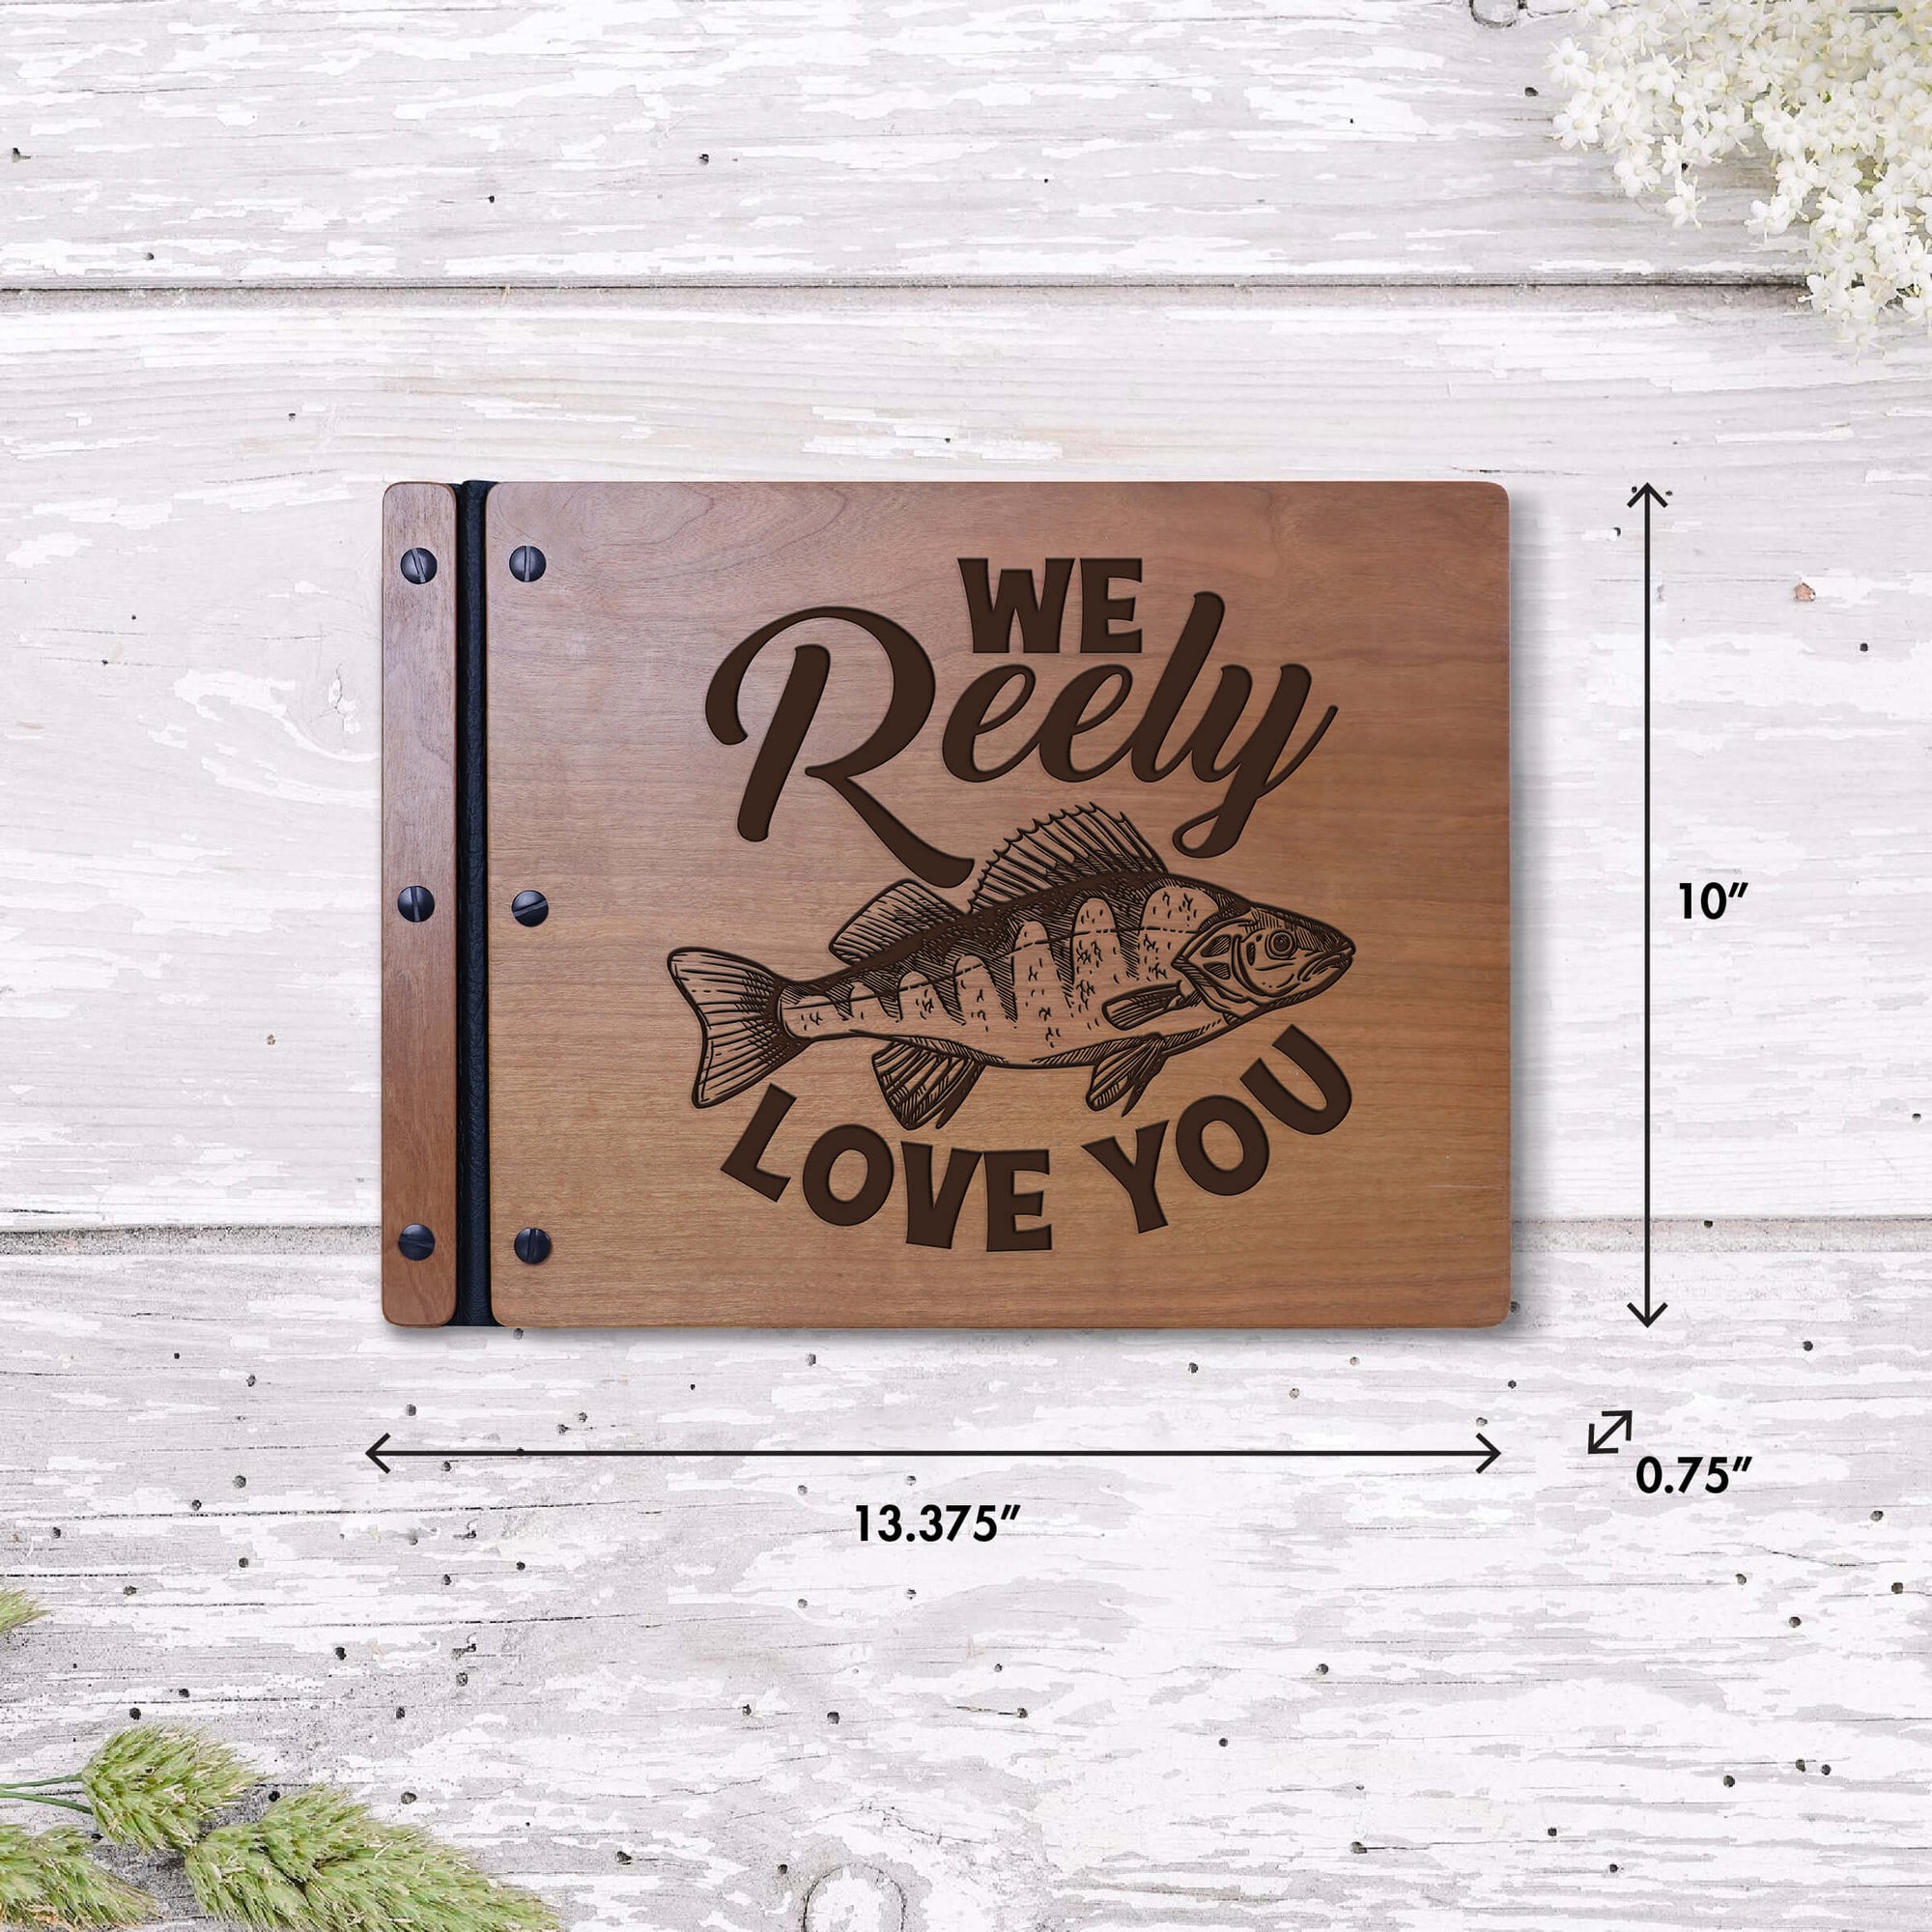 Wooden Memorial Large Guestbook with Fisherman Verse for Funeral Service - We Reely Love You